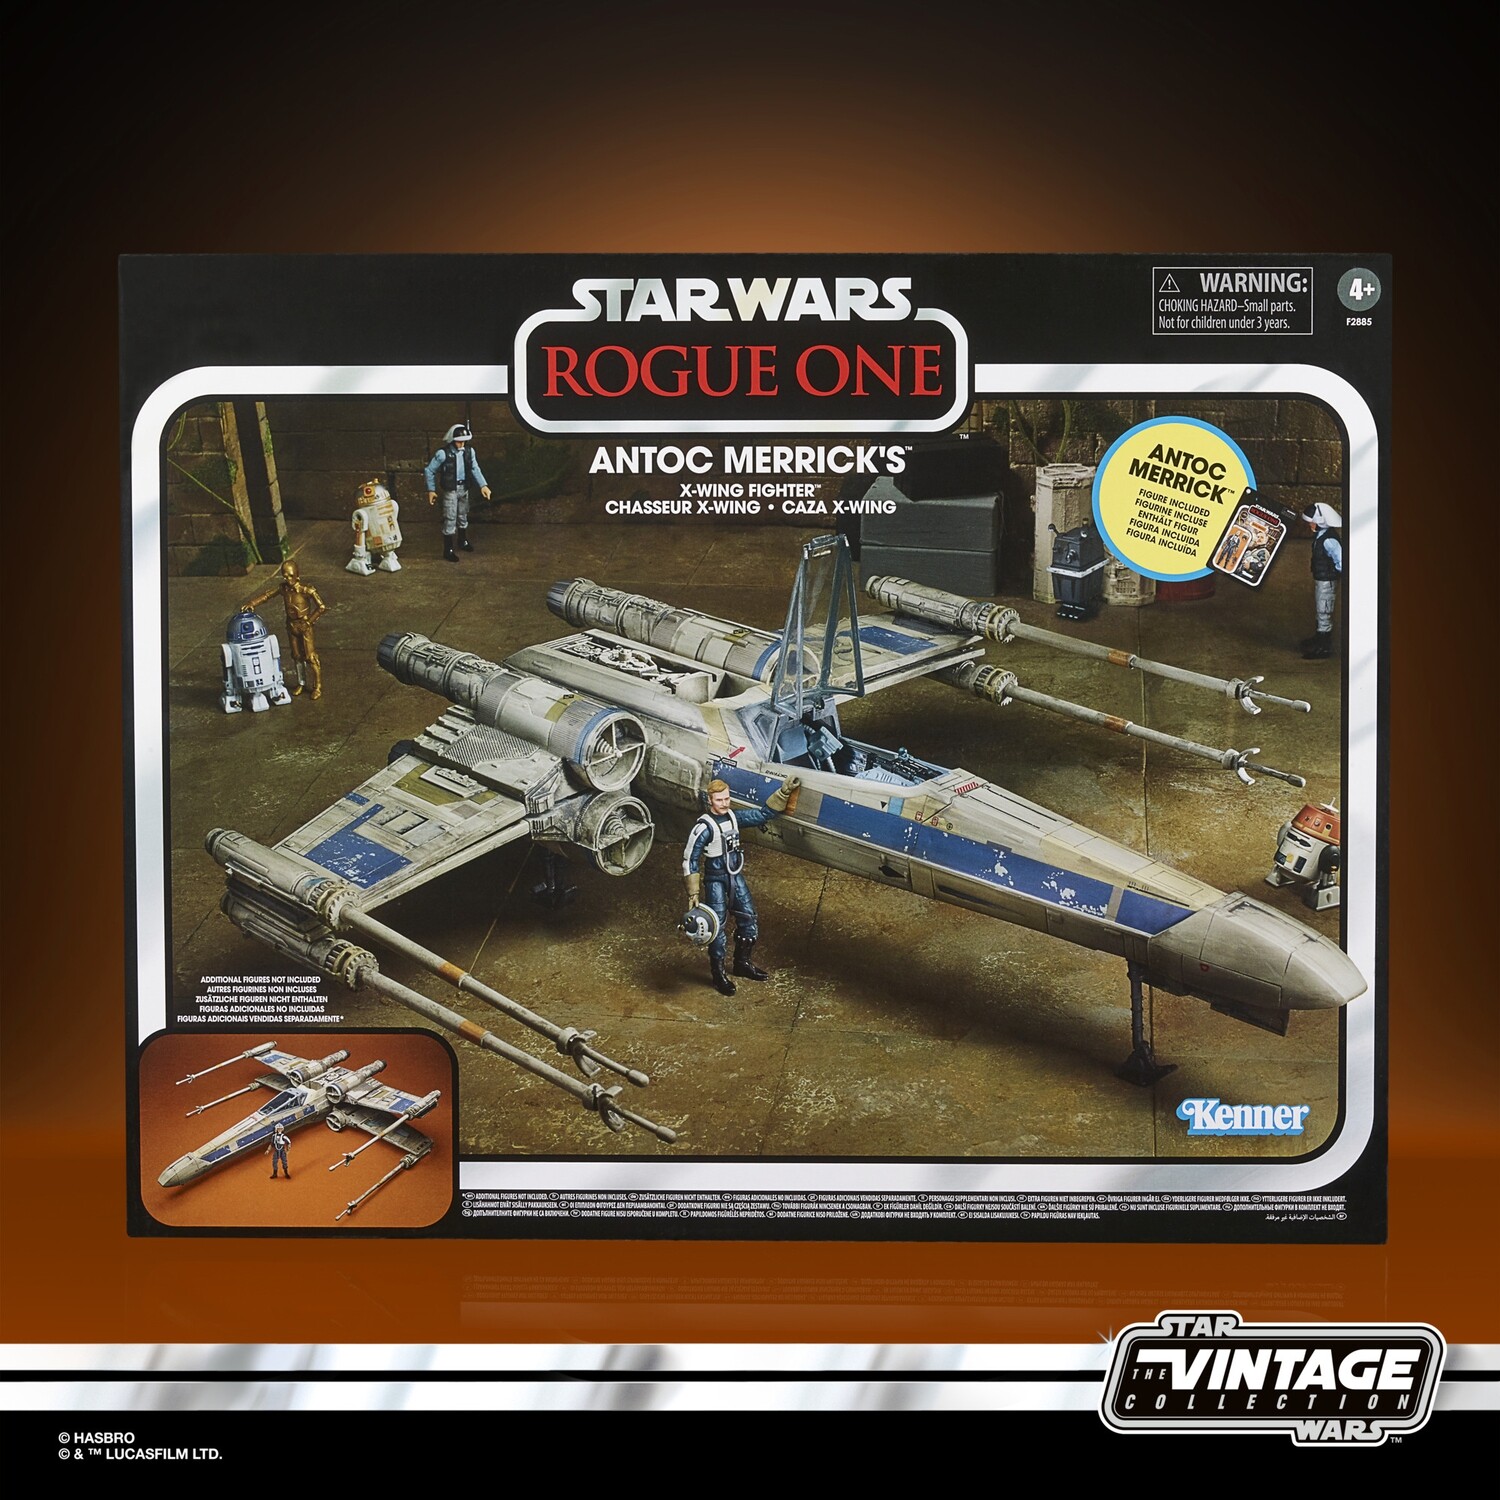 Star Wars The Vintage Collection Rogue One Xwing + Antoc Merrick figure [129,99]